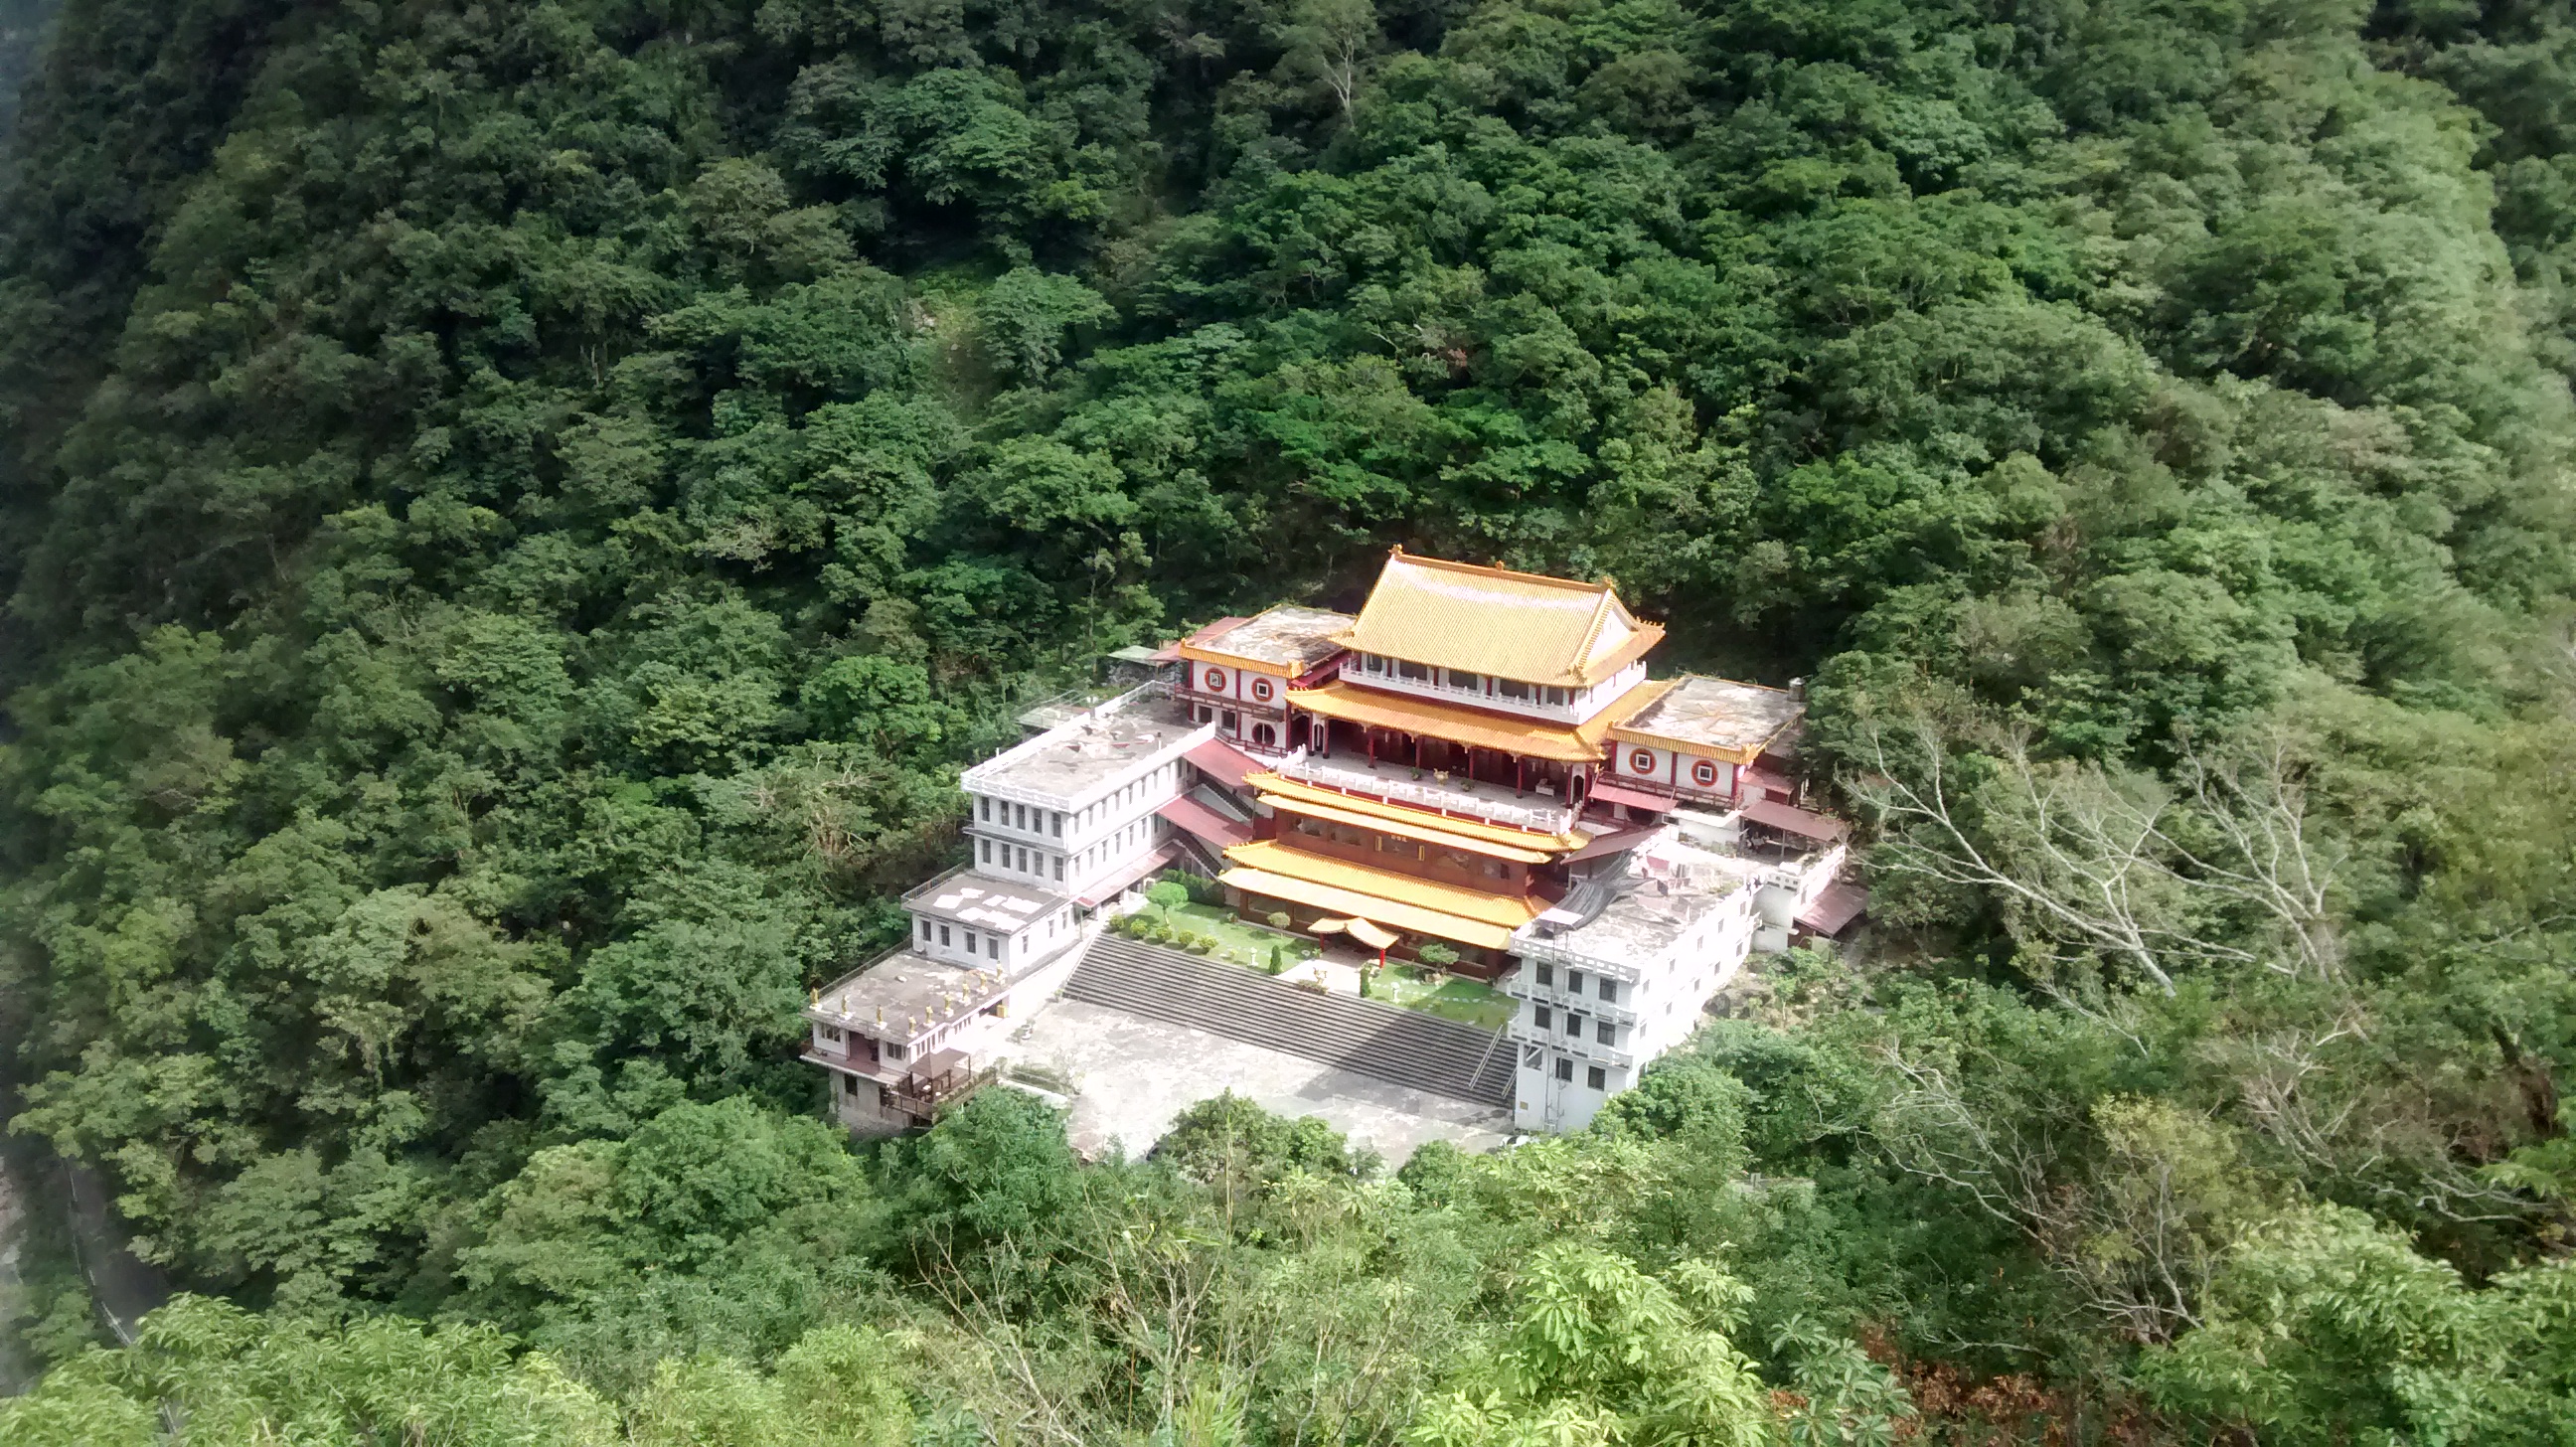 Above a Buddhist Temple at Taroko
Gorge